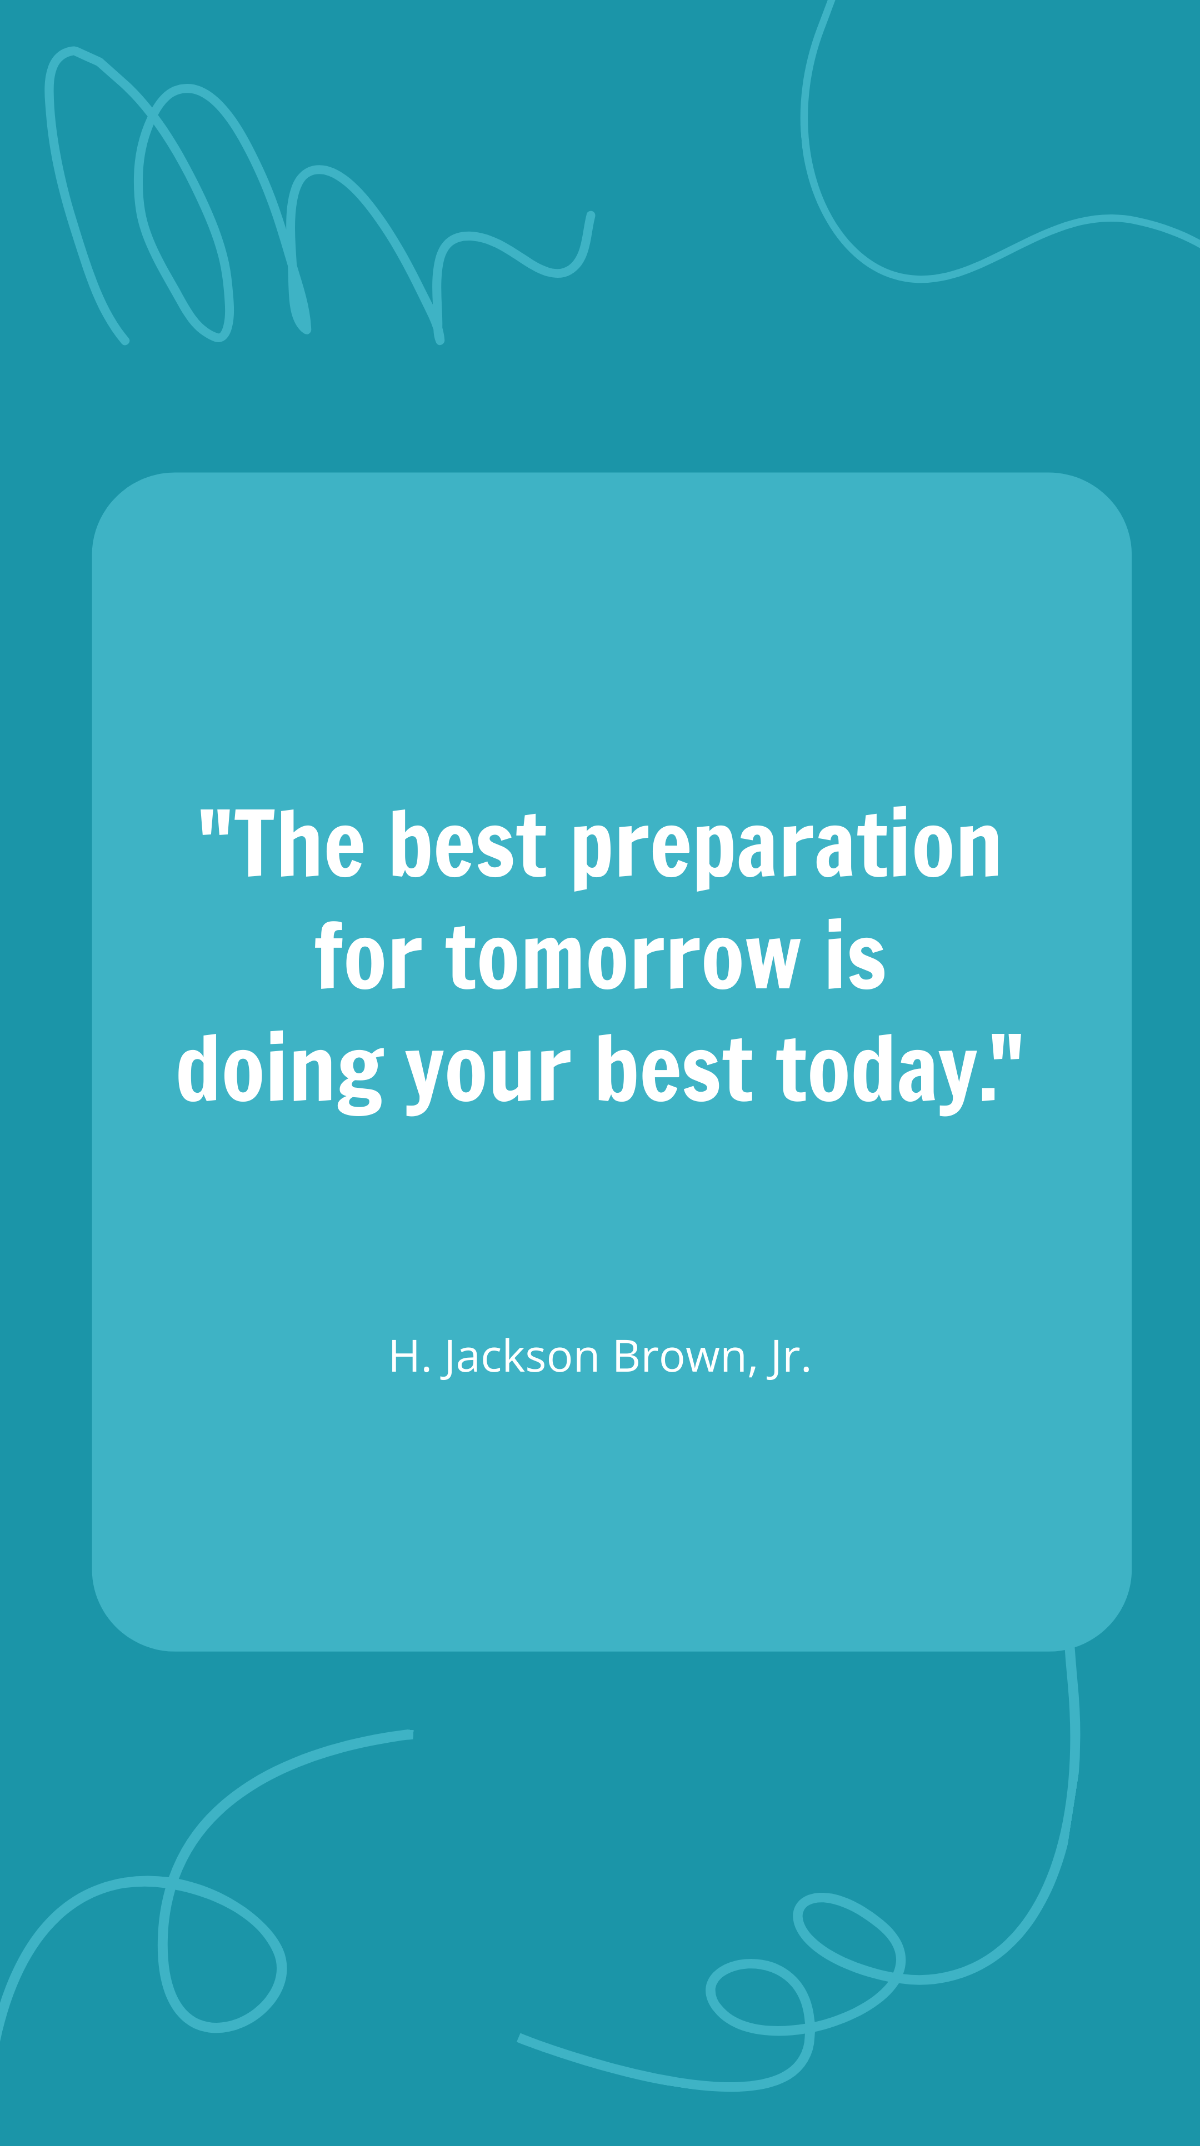 H. Jackson Brown, Jr. - The best preparation for tomorrow is doing your best today Template